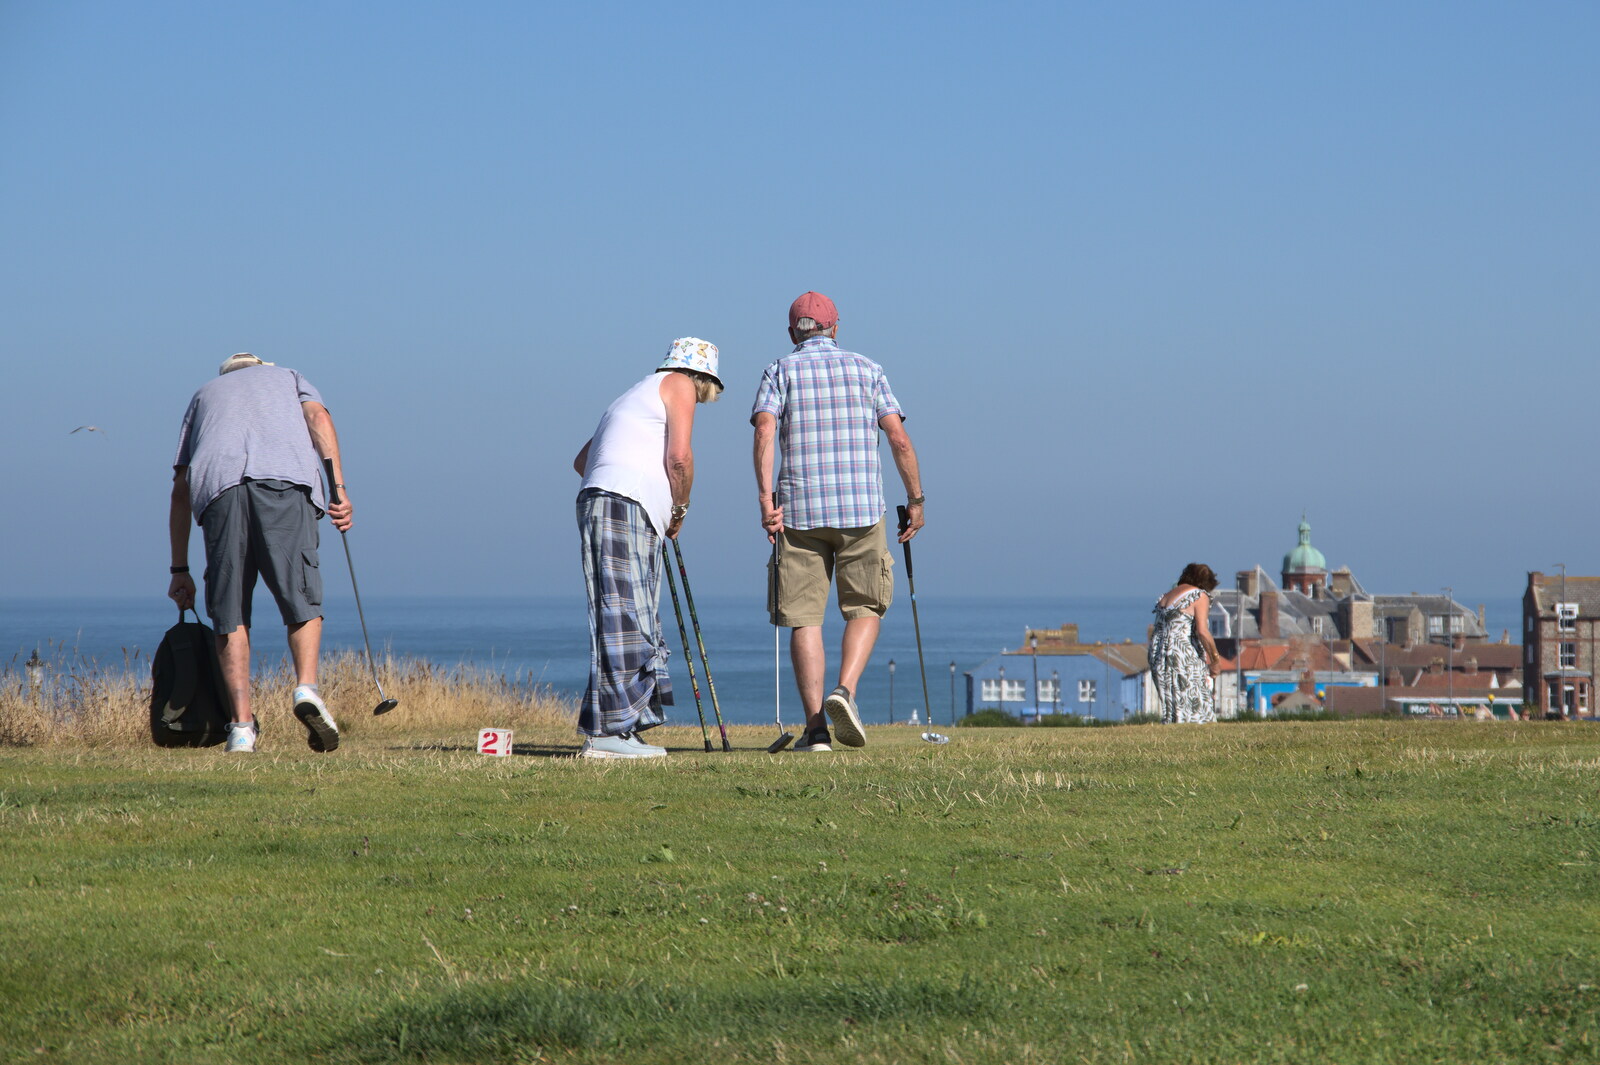 Old dudes play pitch-and-putt on the clifftop from Camping at Forest Park, Cromer, Norfolk - 12th August 2022